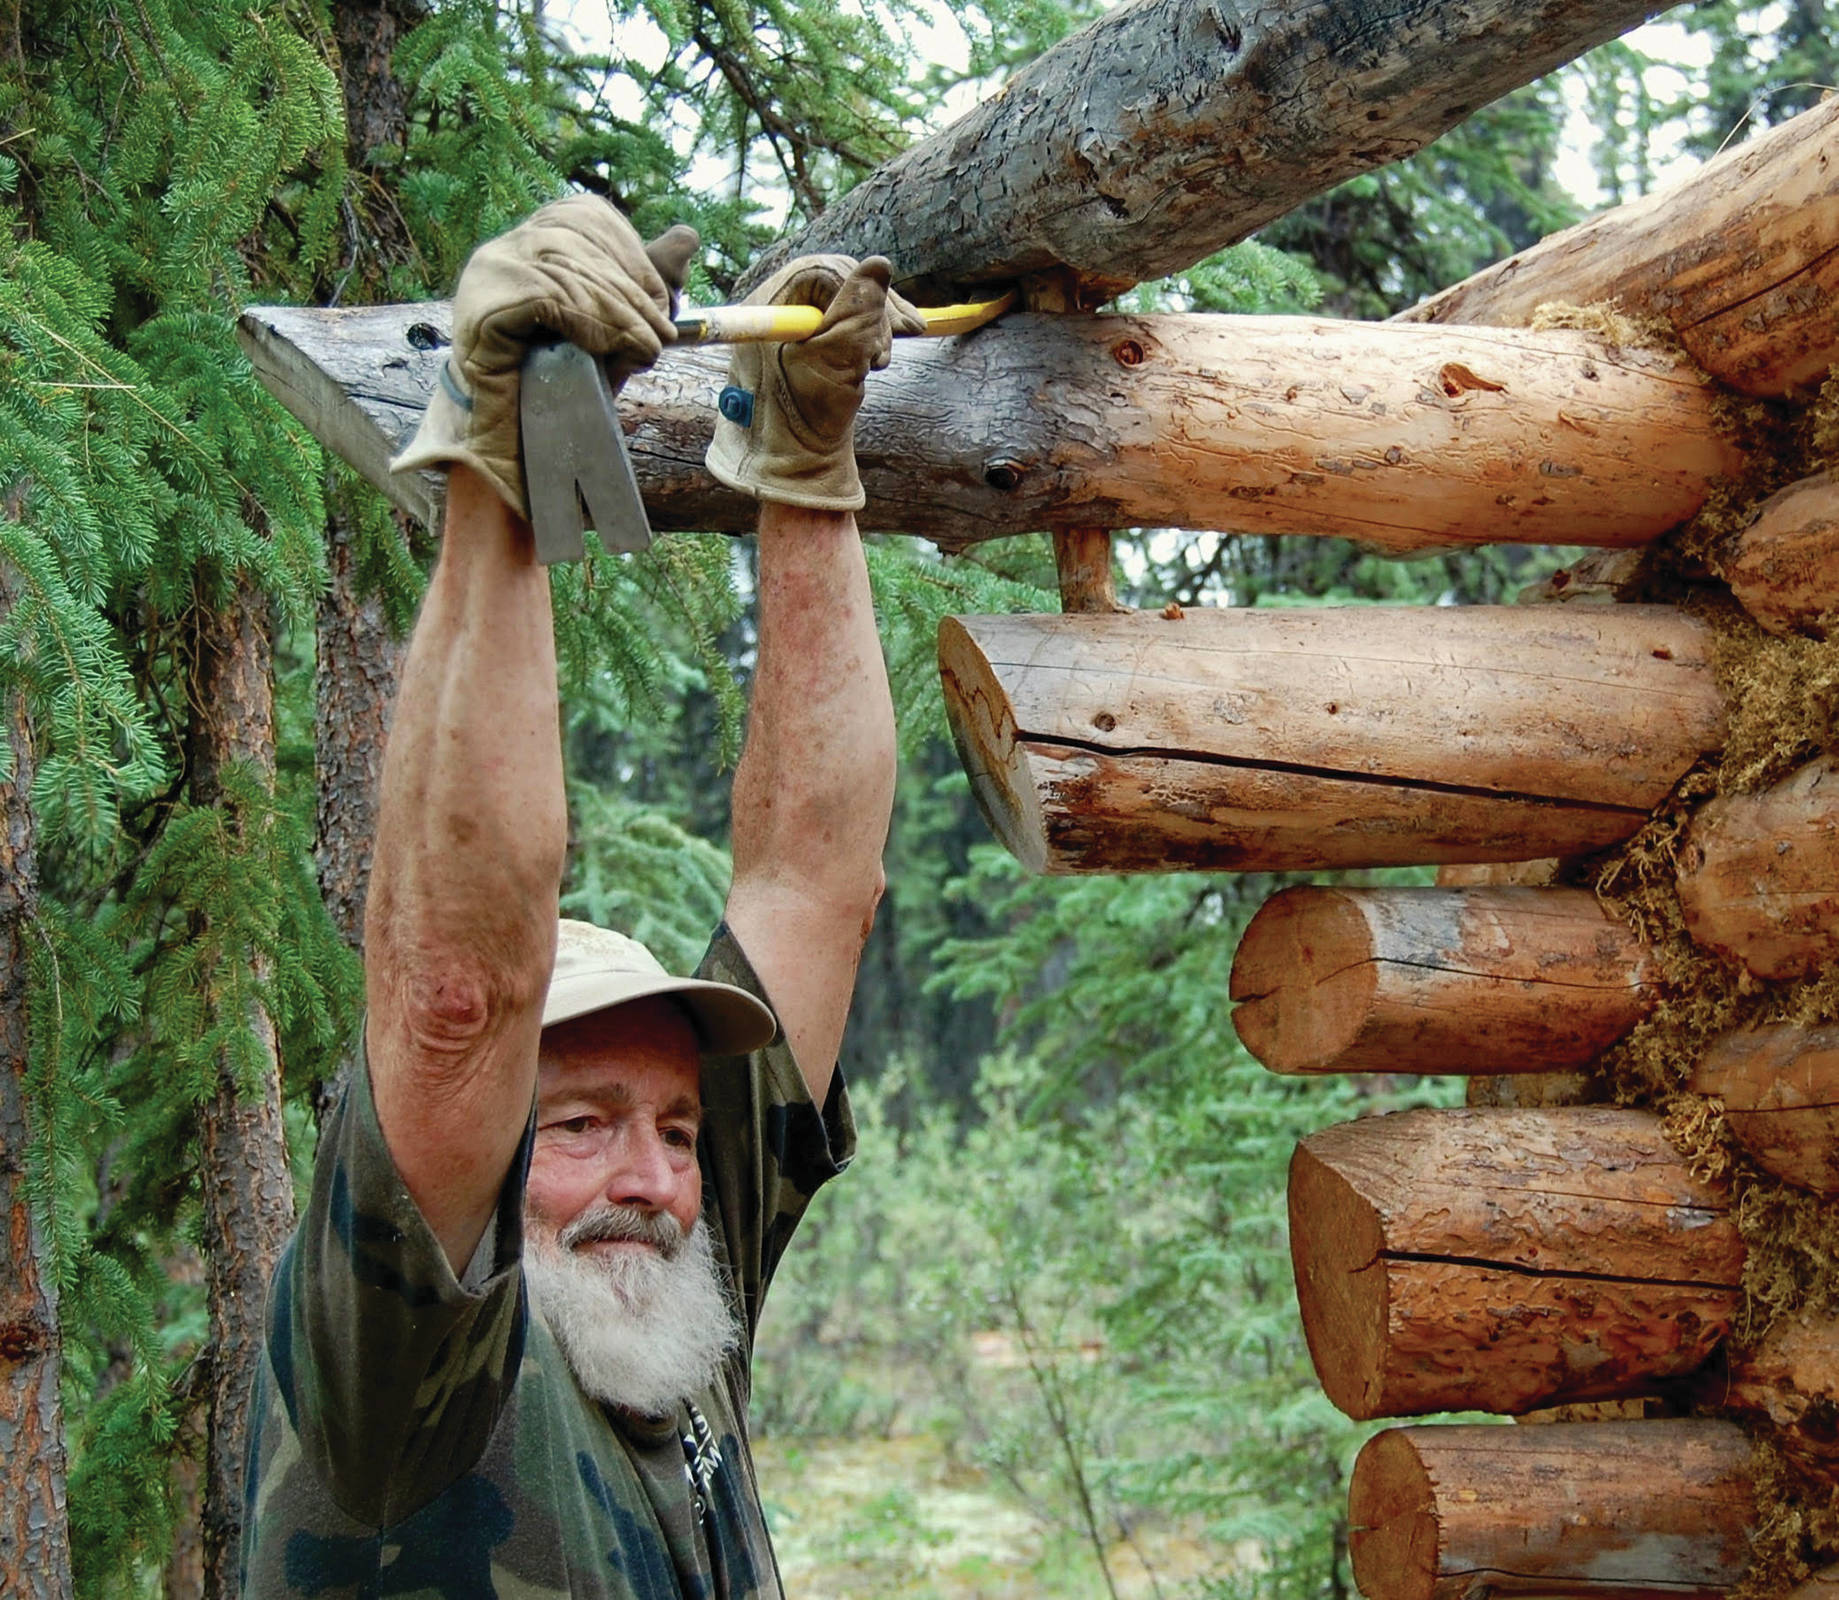 Tom Irons works on taking apart the cabin he and Jean Aspen built in a still photo from the movie “ReWilding Kernwood,” filmed from 2016 to 2018 on the Chandalar River in the Brooks Range, Alaska. (Photo courtesy of Jean Aspen)